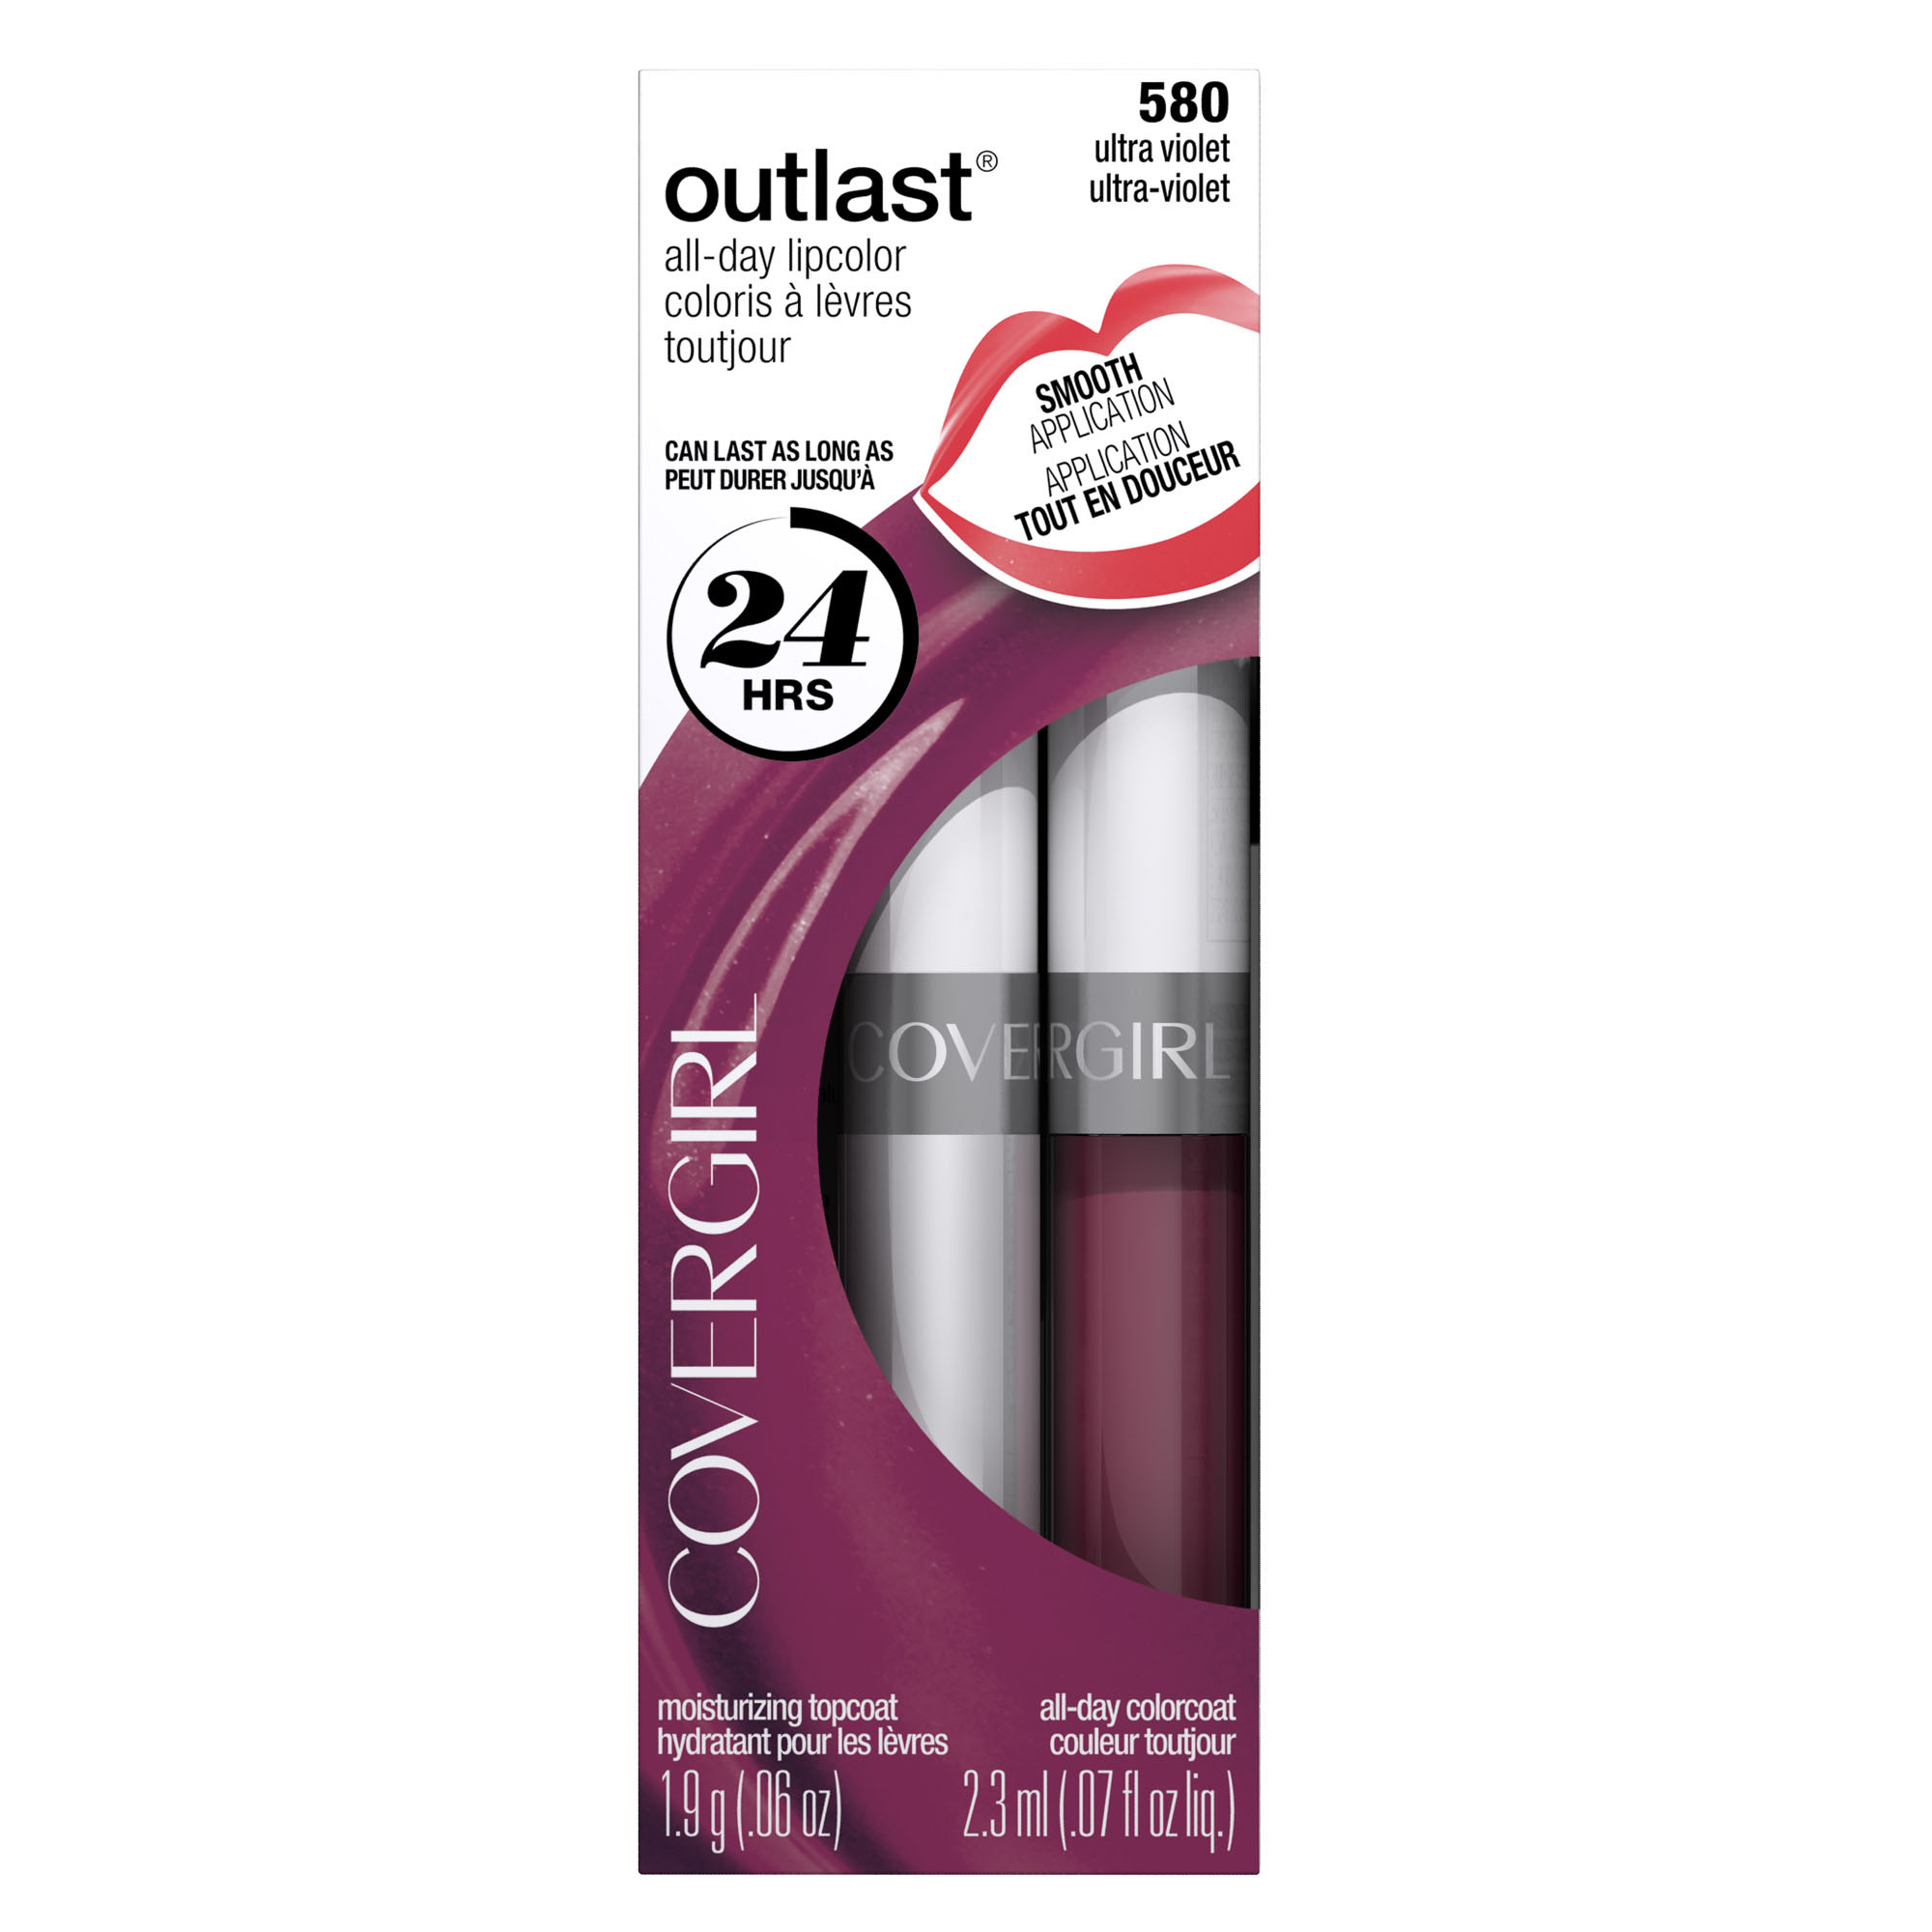 COVERGIRL Outlast All-Day Moisturizing Lip Color, Ultra Violet - image 2 of 5